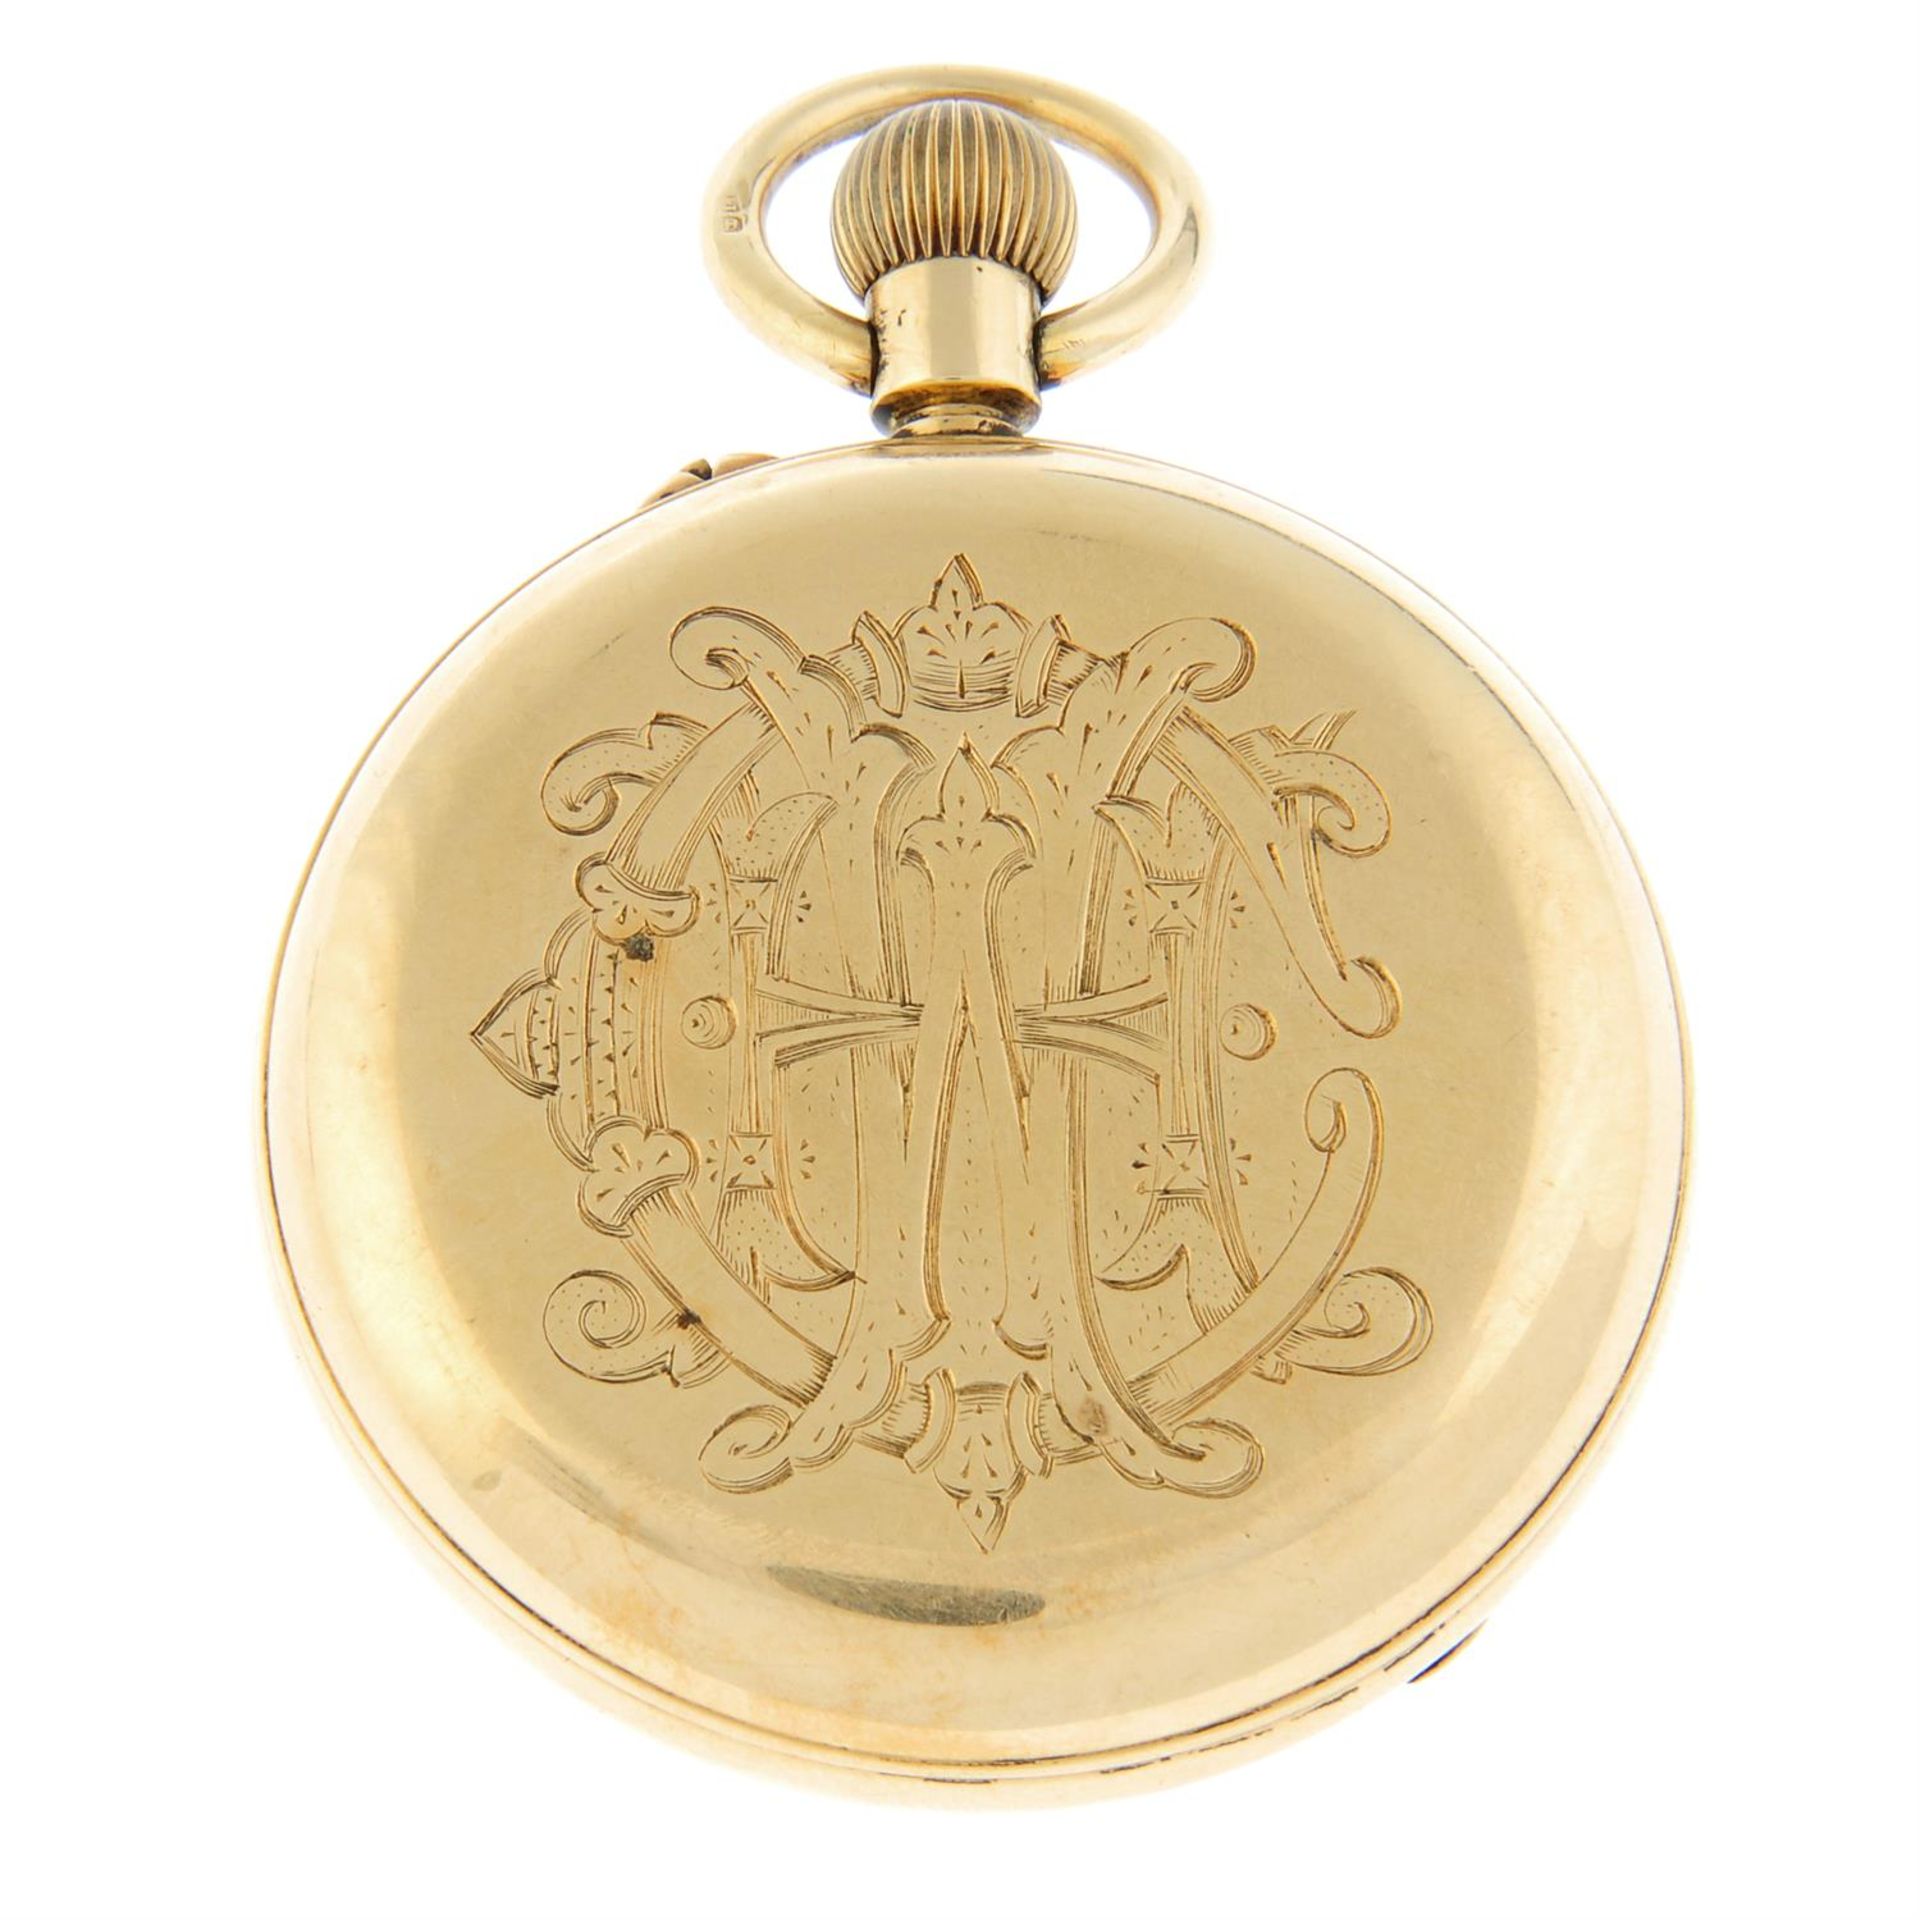 A pocket watch by Burman, 48mm. - Image 2 of 3